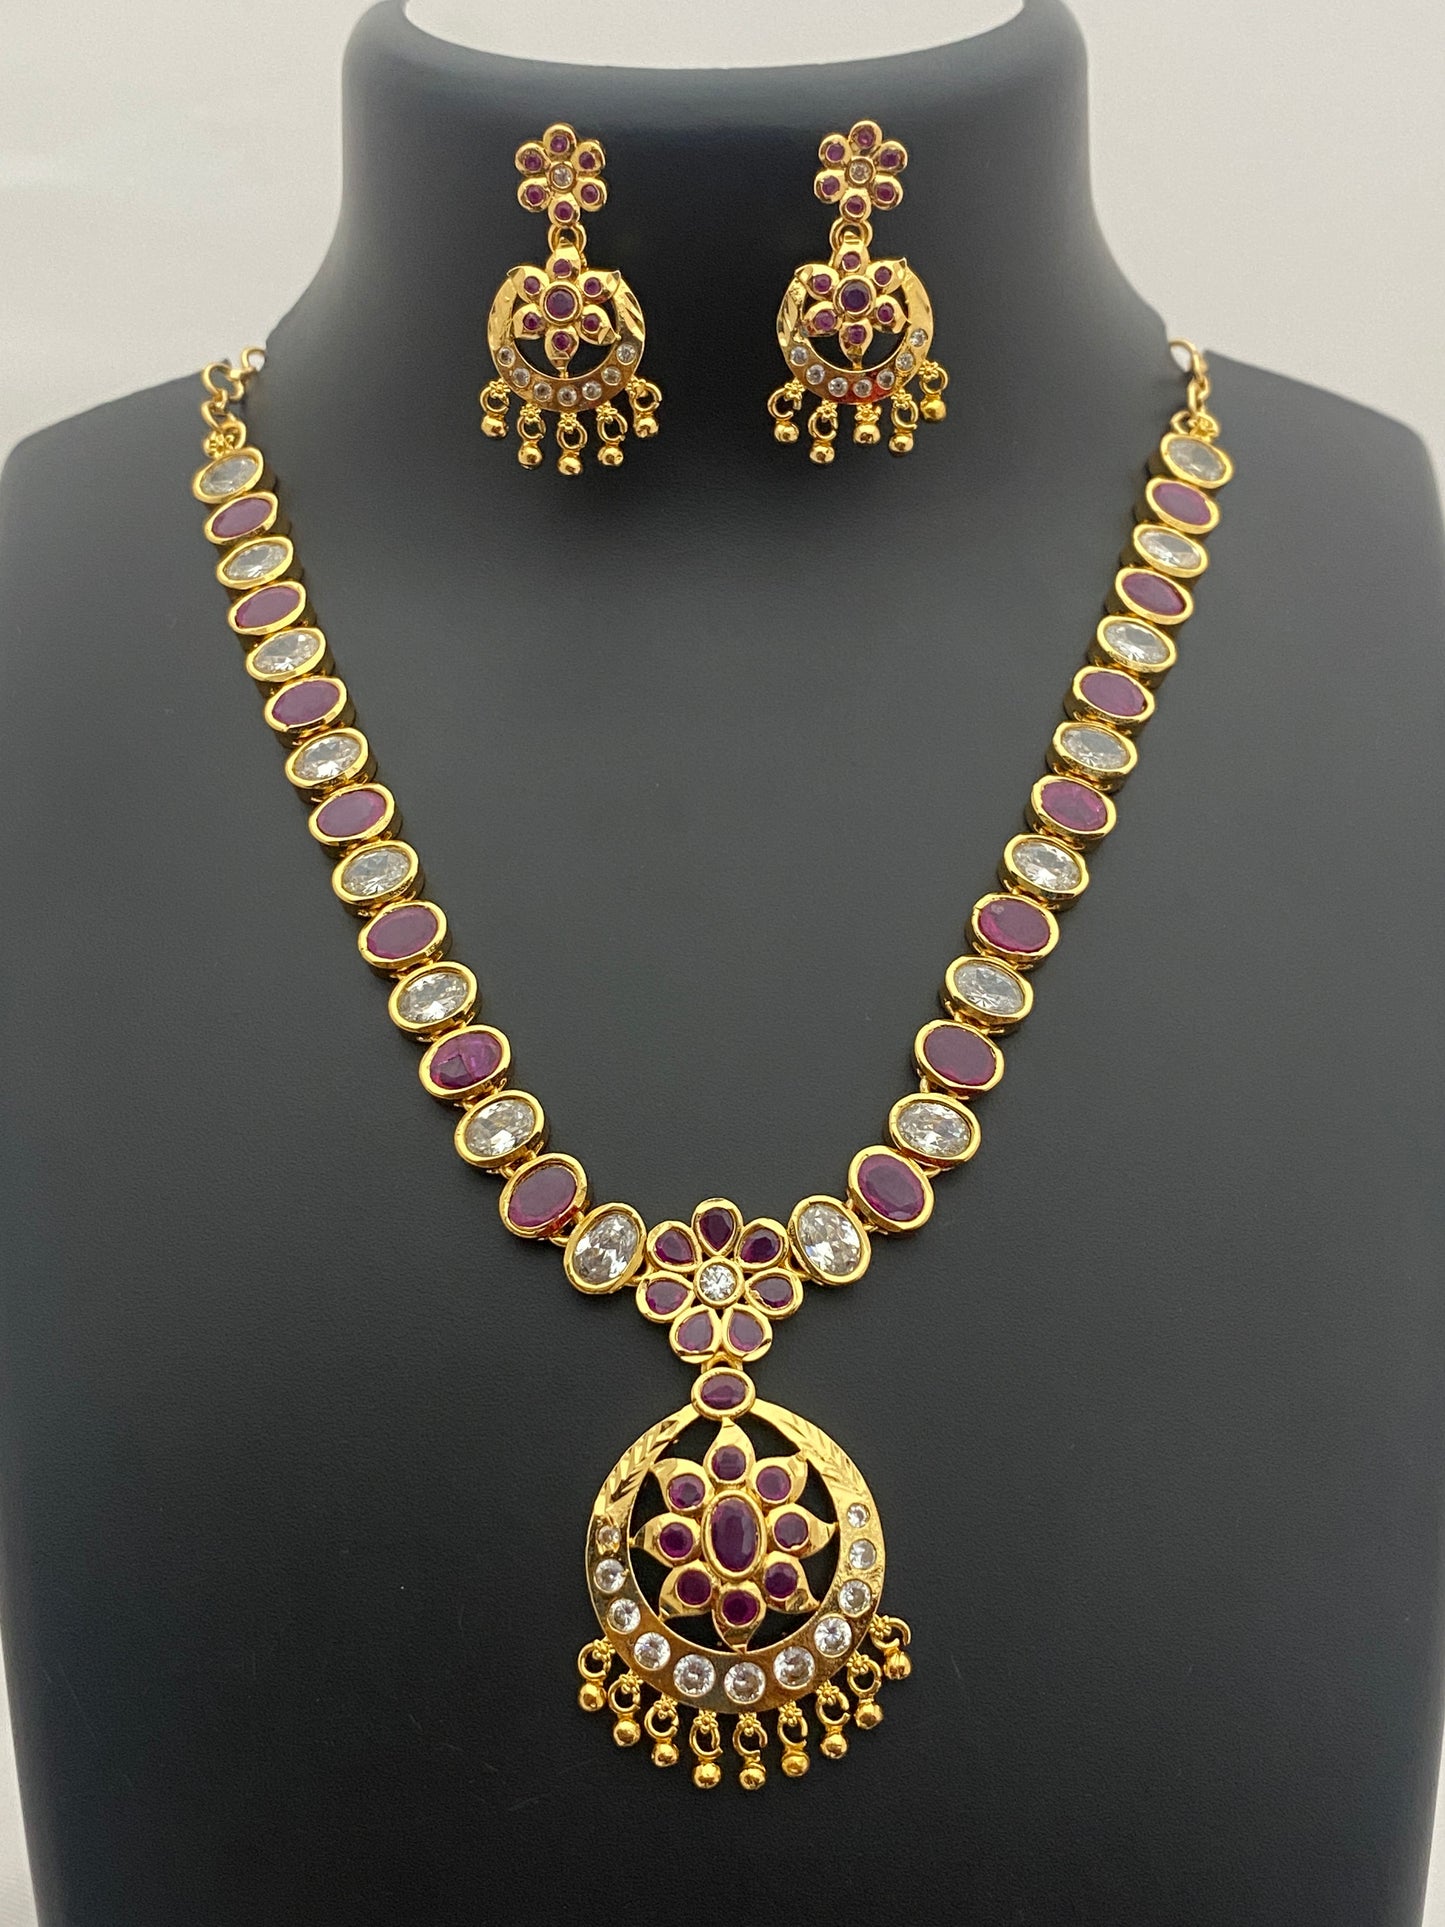 Charming Premium Quality Ruby Color Gold Plated Necklace And Earrings For Women Near Me